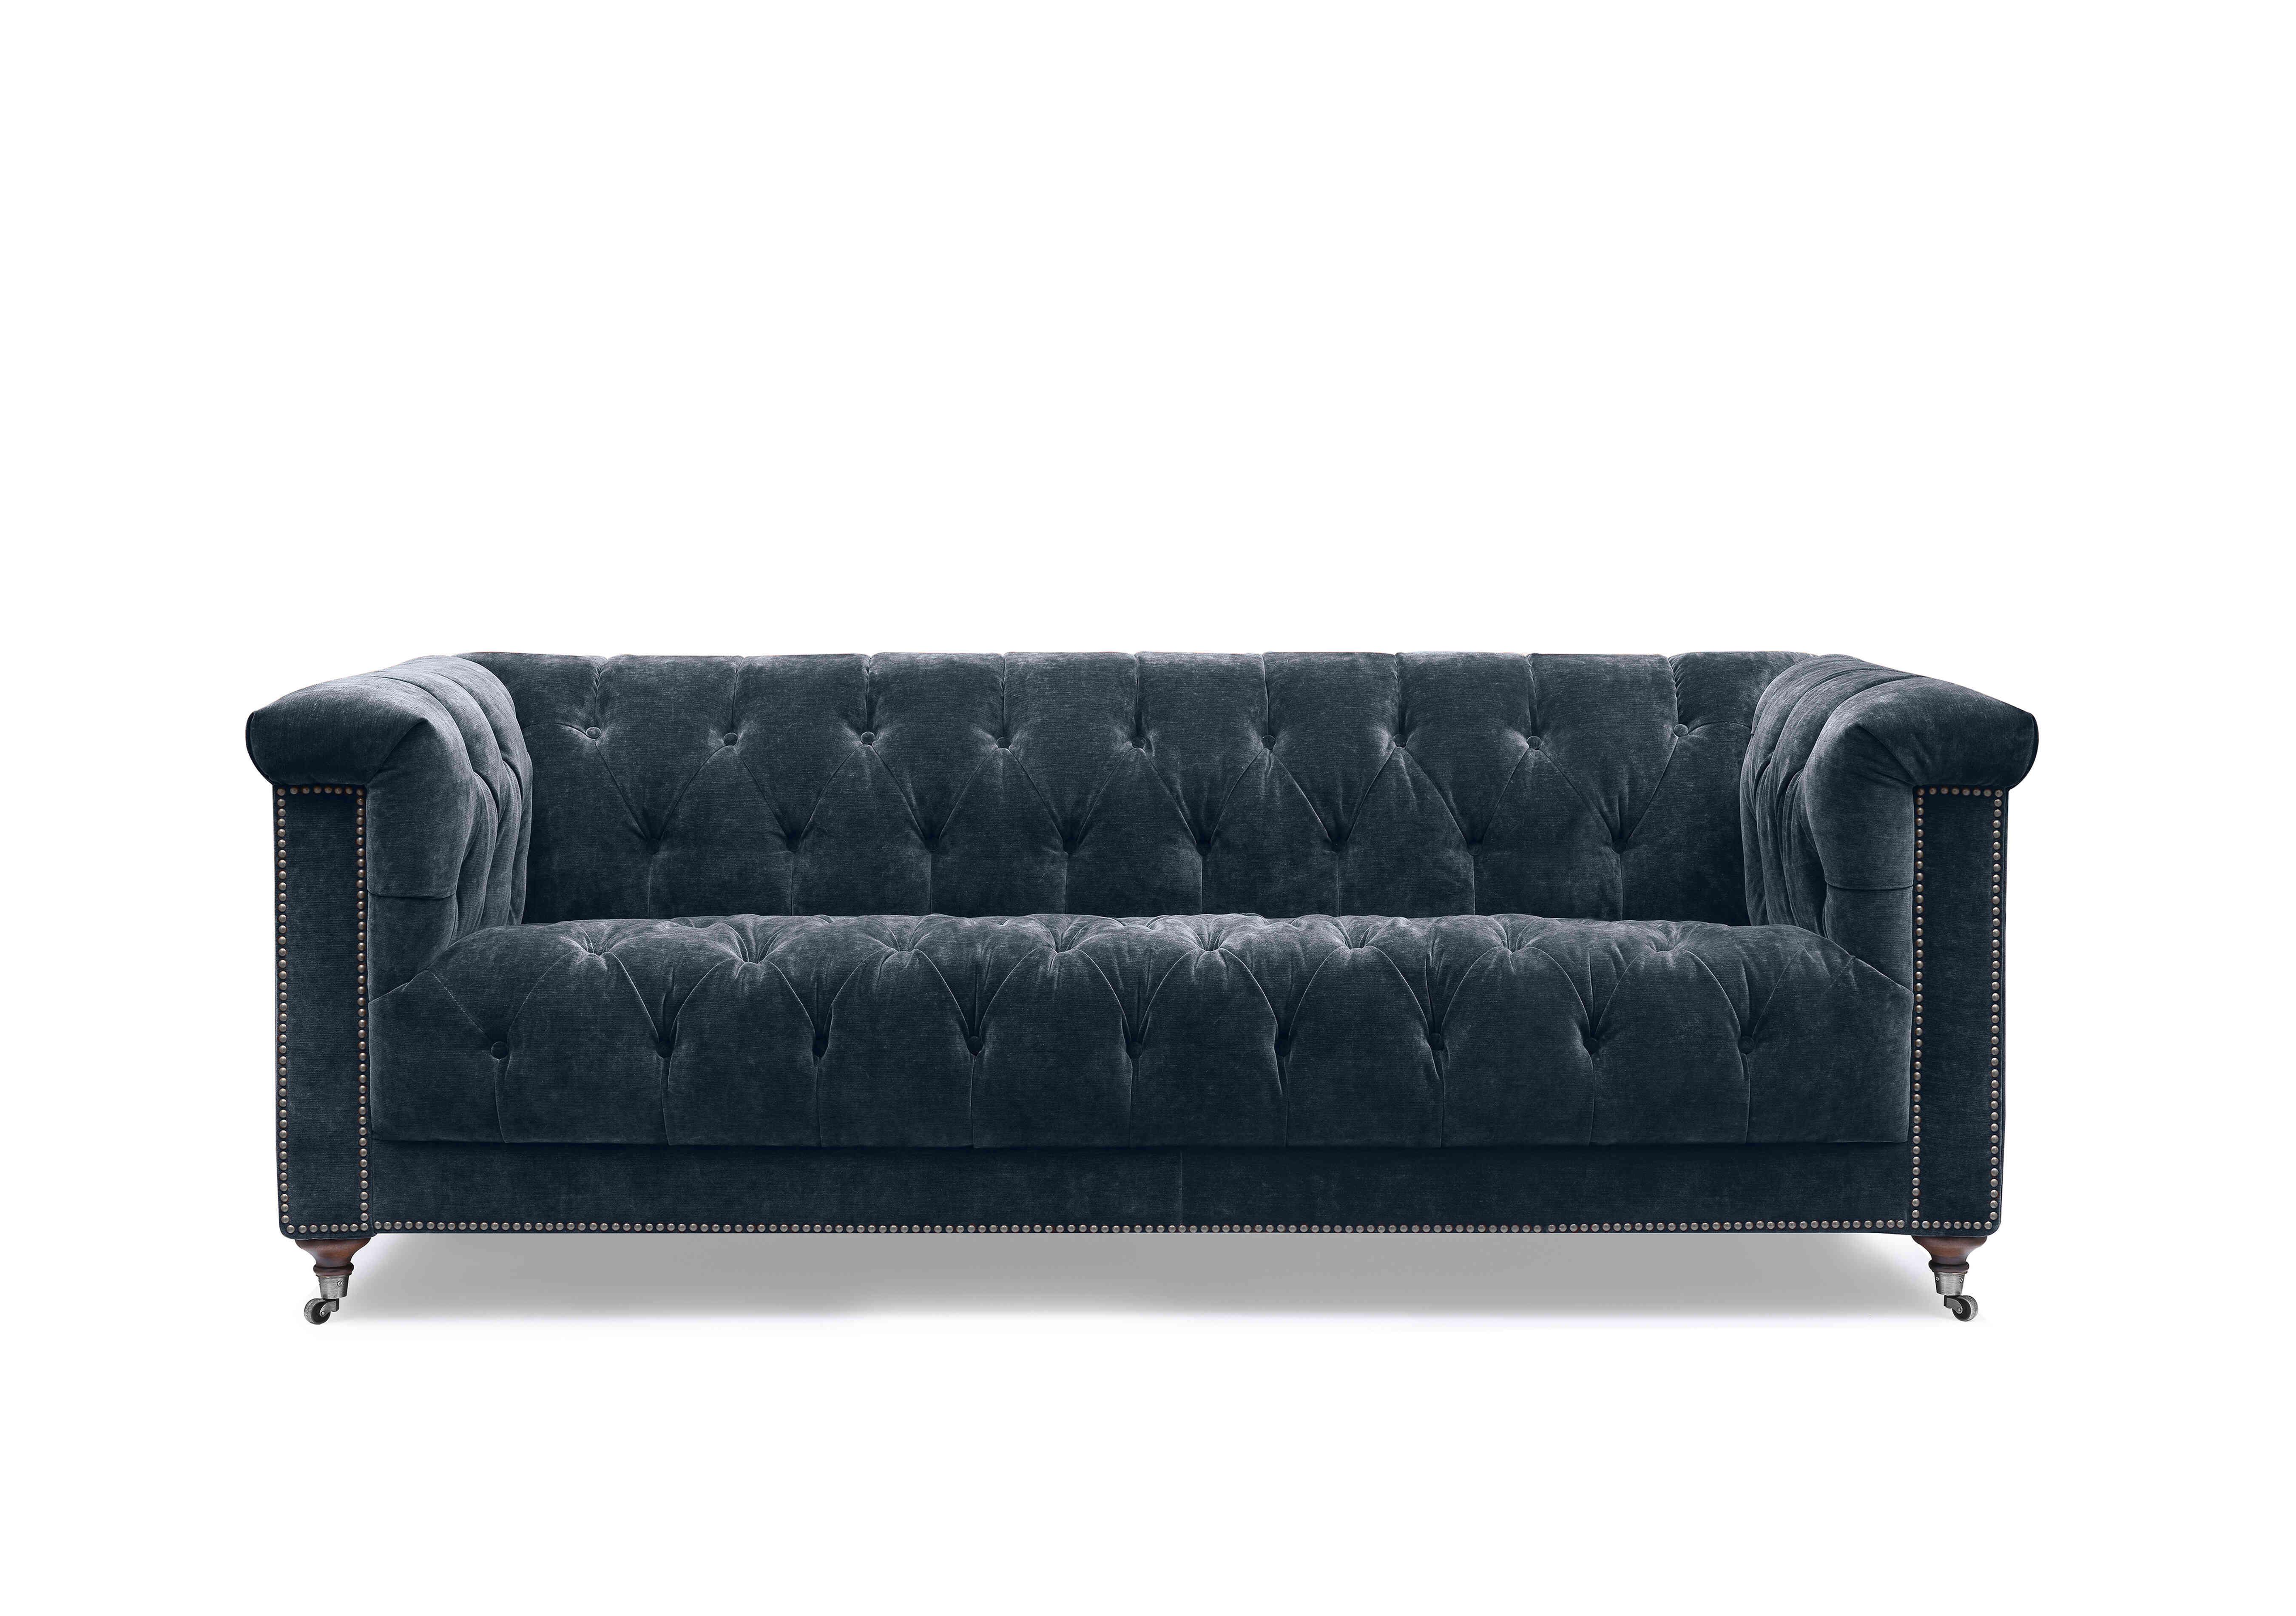 Wallace 3 Seater Fabric Chesterfield Sofa in X3y2-W024 Midnight on Furniture Village